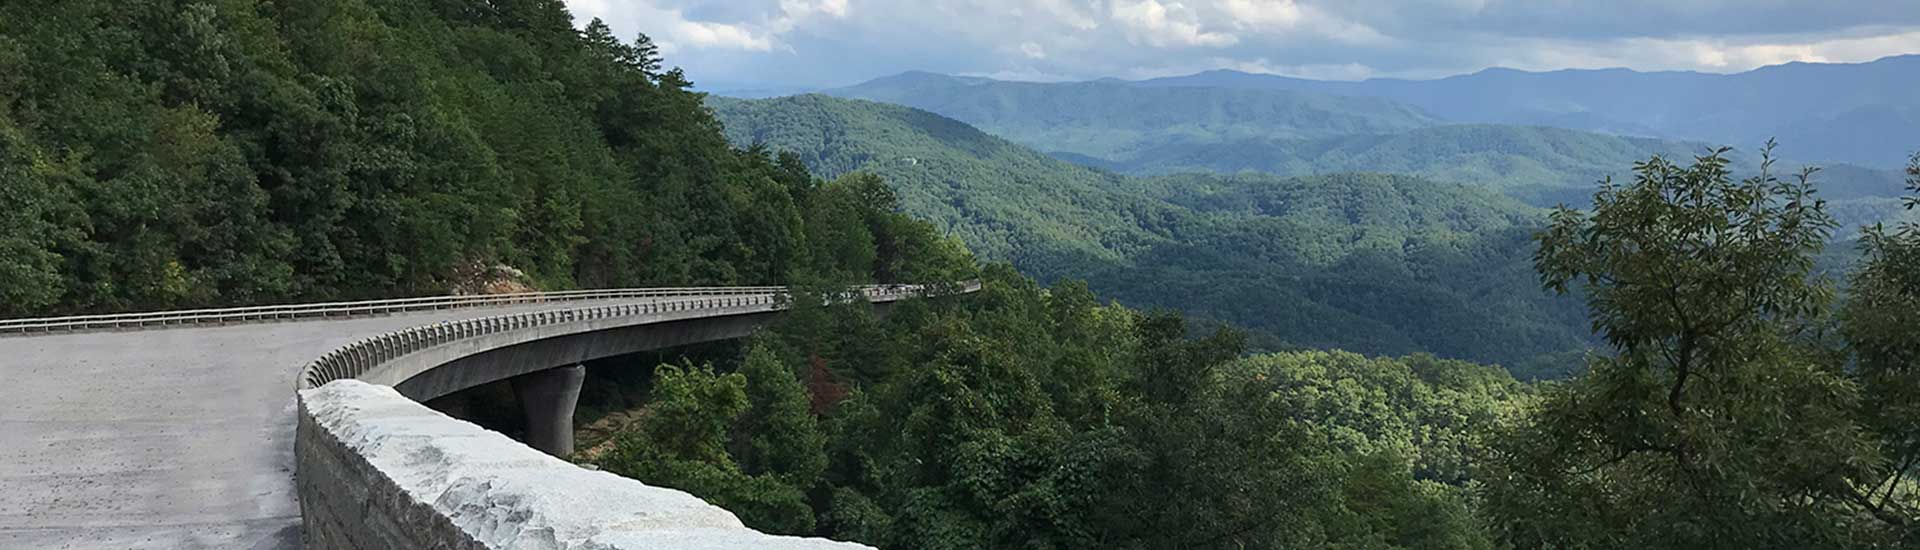 View of green rolling hills and blue ridges of the Great Smoky Mountains from Foothills Parkway bridge, GSMNP